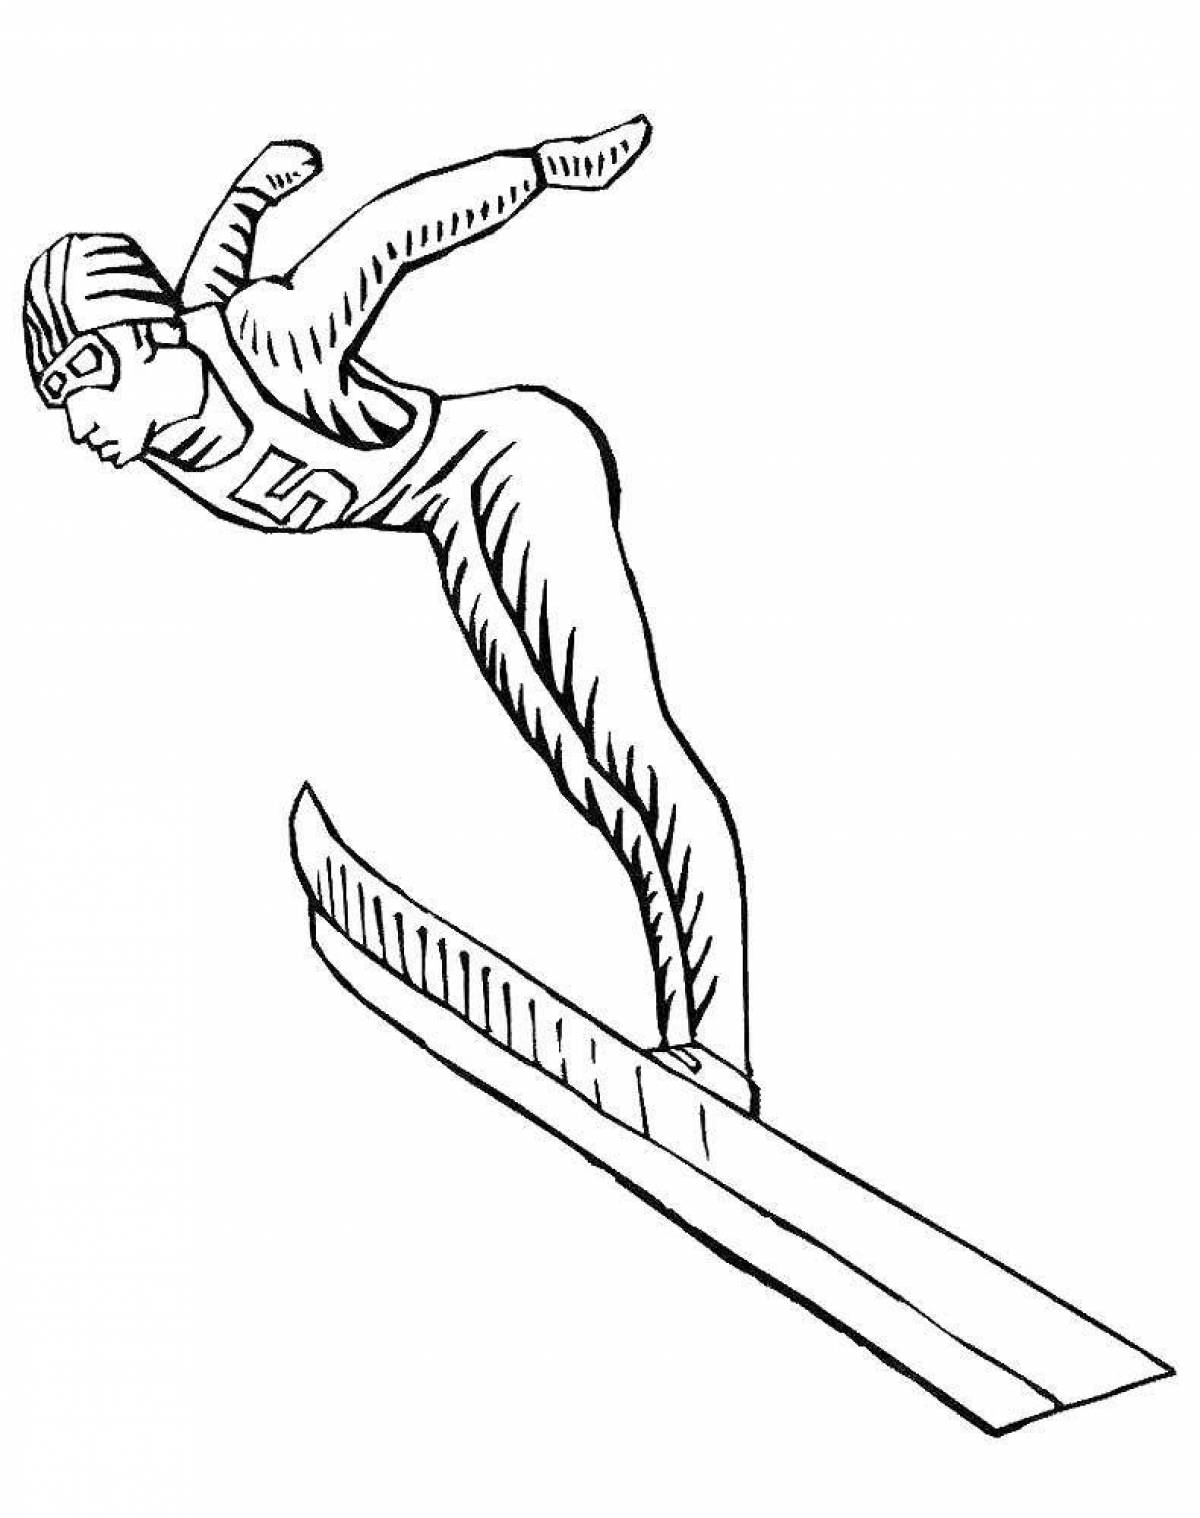 Dynamic skier coloring page